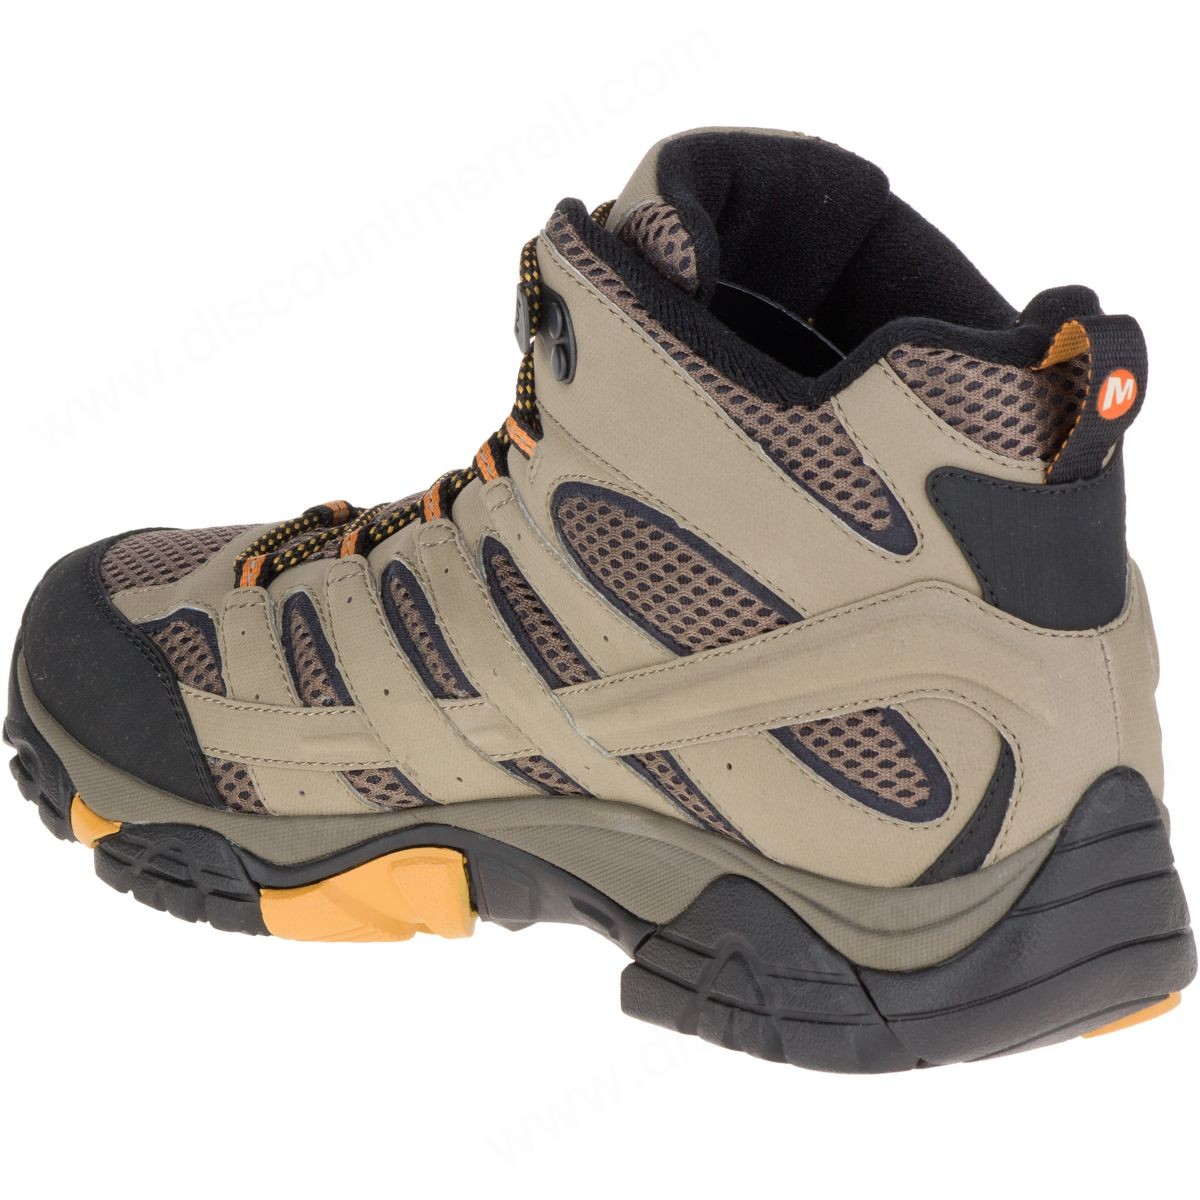 Merrell Man's Moab Mother Of All Boots™ Mid Gore-Tex® Wide Width Walnut - -6